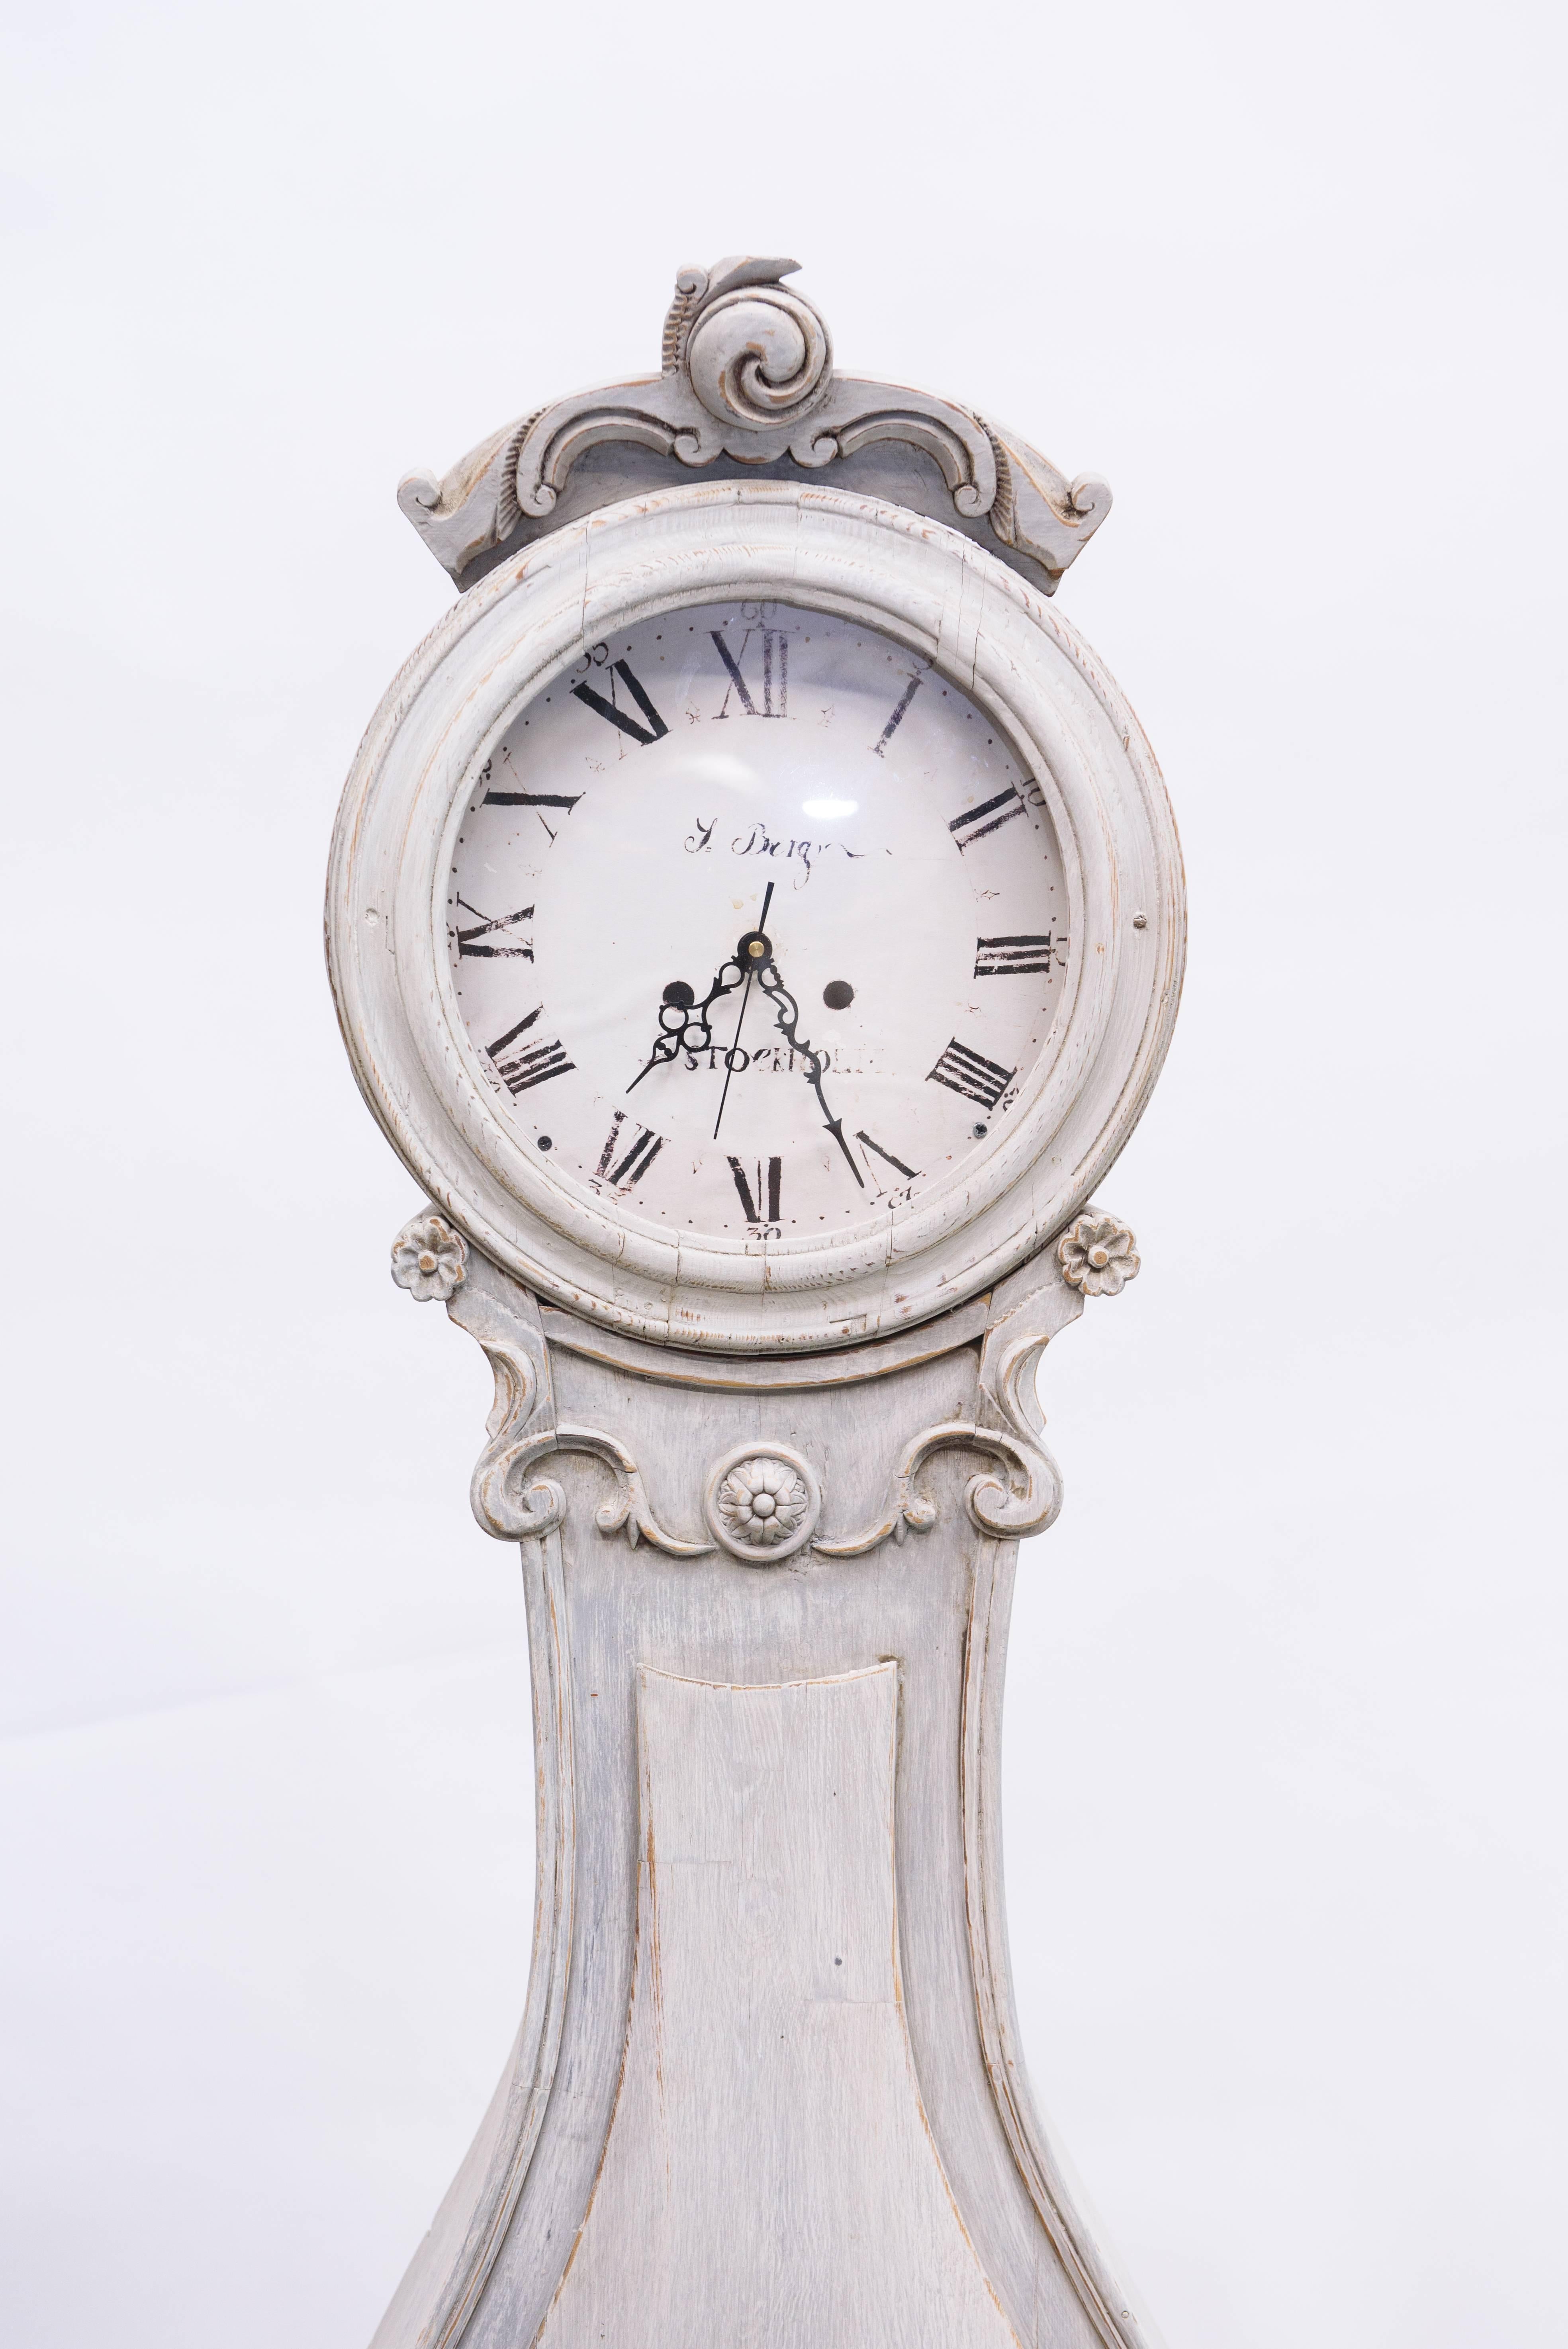 This is a Swedish long case clock (Mora Style) but this model is called a 